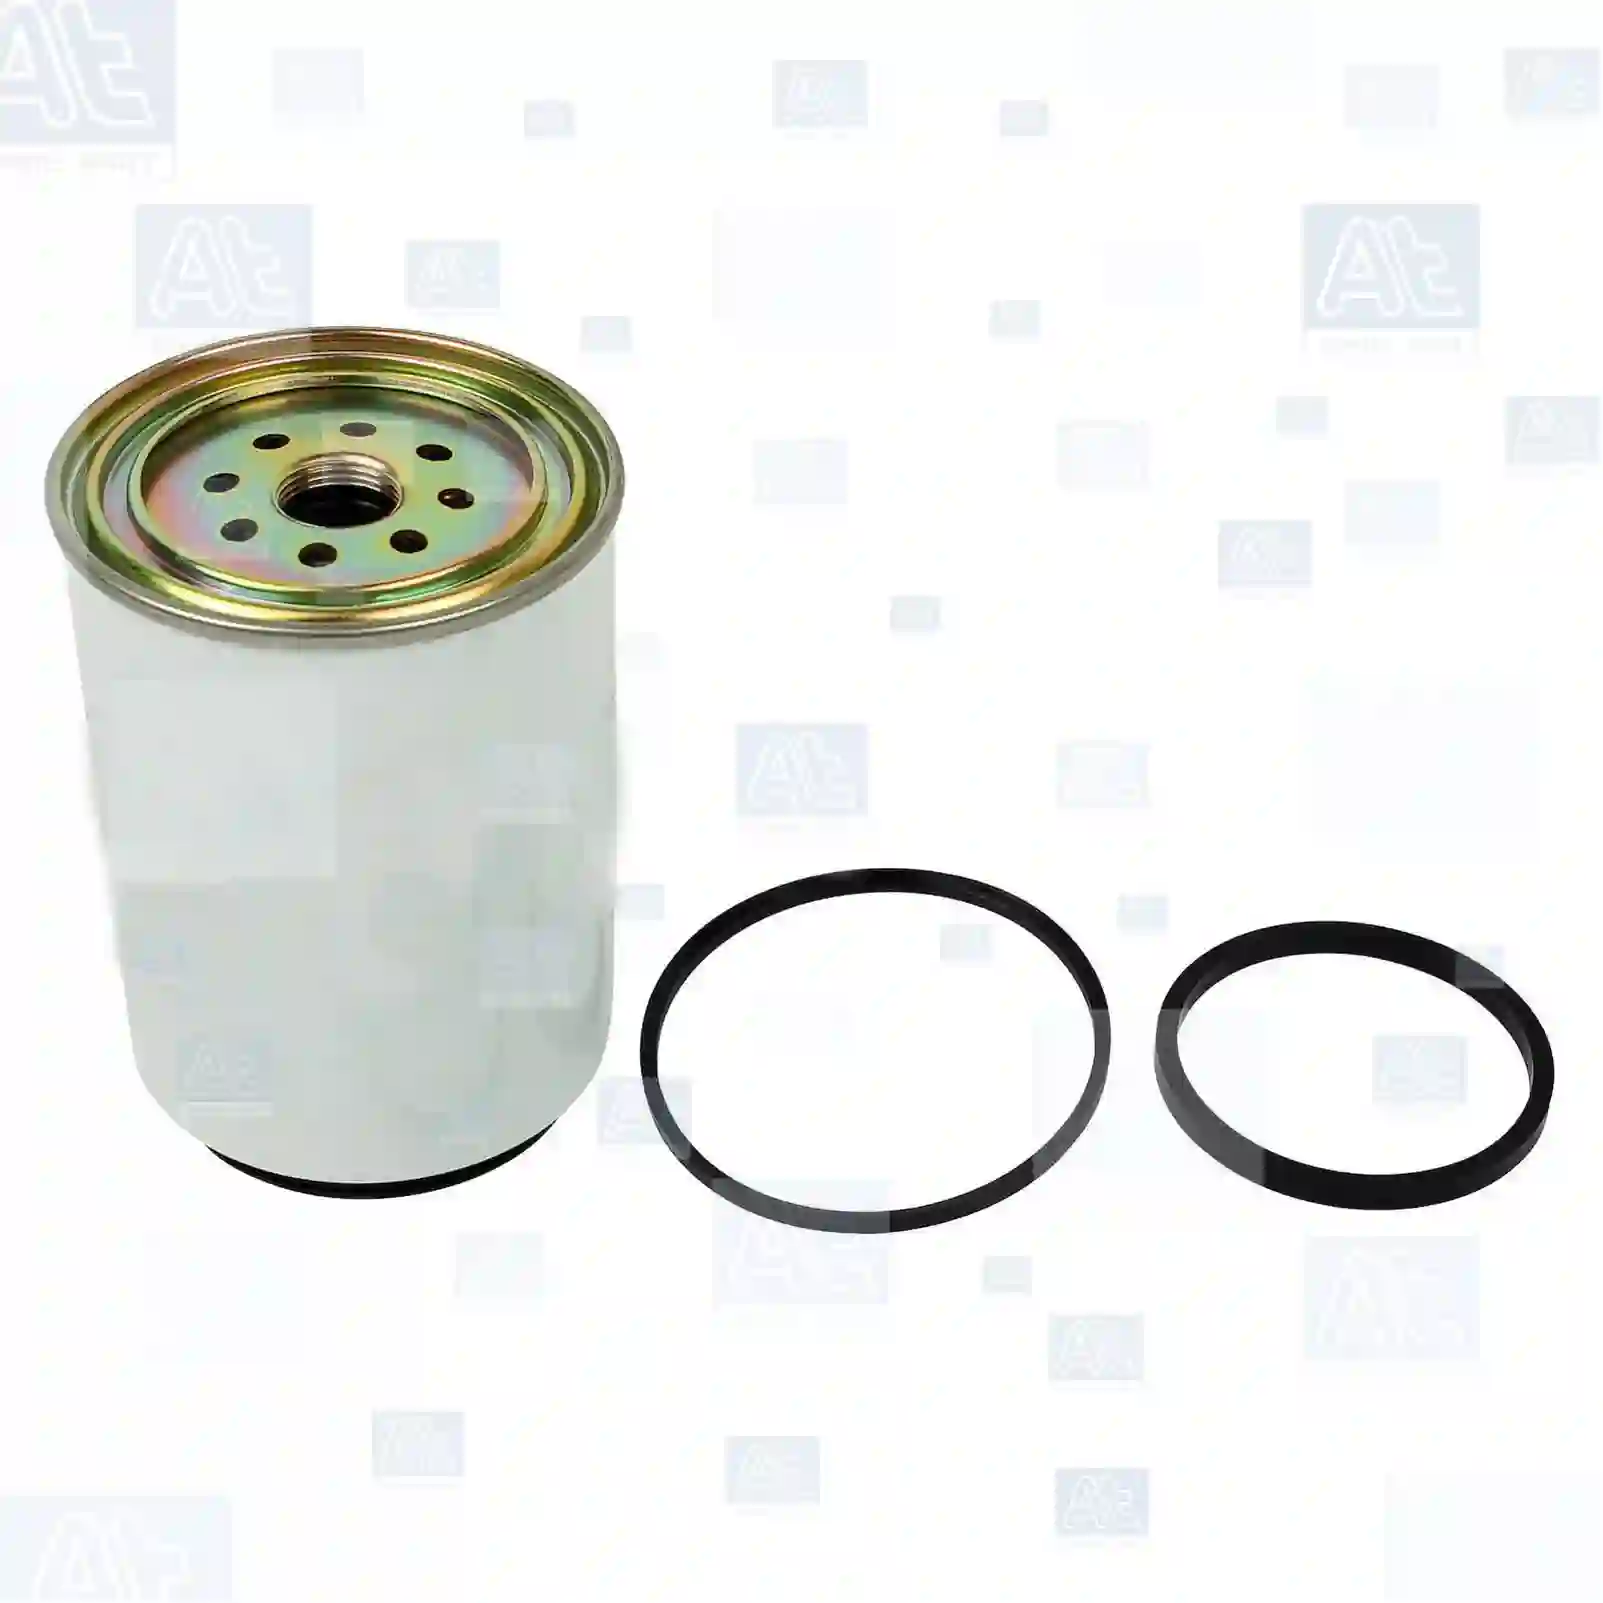 Fuel filter, water separator, 77723274, RAIR90P, 1685159C91, 430-8929, 0000687110, 0007733150, 0011342140, 0011342141, 1296851, 1355891, 1393640, 1529639, 45056112, 99707309813, 93297277, 03322877, 3322877, 23414E+024, 23414E0020, 23414E024, 8-97605118-1, 8-98081862-0, 5801403243, RE500186, RE502203, 51125030066, 6298164M1, 3754770002, 1393640, 0112142040, 0112142225, 0190142210, ST6007, 16403NY000, 20741196, 21140258, 3945966, 8159975, 81599755, 2R0127177C, ZG10153-0008 ||  77723274 At Spare Part | Engine, Accelerator Pedal, Camshaft, Connecting Rod, Crankcase, Crankshaft, Cylinder Head, Engine Suspension Mountings, Exhaust Manifold, Exhaust Gas Recirculation, Filter Kits, Flywheel Housing, General Overhaul Kits, Engine, Intake Manifold, Oil Cleaner, Oil Cooler, Oil Filter, Oil Pump, Oil Sump, Piston & Liner, Sensor & Switch, Timing Case, Turbocharger, Cooling System, Belt Tensioner, Coolant Filter, Coolant Pipe, Corrosion Prevention Agent, Drive, Expansion Tank, Fan, Intercooler, Monitors & Gauges, Radiator, Thermostat, V-Belt / Timing belt, Water Pump, Fuel System, Electronical Injector Unit, Feed Pump, Fuel Filter, cpl., Fuel Gauge Sender,  Fuel Line, Fuel Pump, Fuel Tank, Injection Line Kit, Injection Pump, Exhaust System, Clutch & Pedal, Gearbox, Propeller Shaft, Axles, Brake System, Hubs & Wheels, Suspension, Leaf Spring, Universal Parts / Accessories, Steering, Electrical System, Cabin Fuel filter, water separator, 77723274, RAIR90P, 1685159C91, 430-8929, 0000687110, 0007733150, 0011342140, 0011342141, 1296851, 1355891, 1393640, 1529639, 45056112, 99707309813, 93297277, 03322877, 3322877, 23414E+024, 23414E0020, 23414E024, 8-97605118-1, 8-98081862-0, 5801403243, RE500186, RE502203, 51125030066, 6298164M1, 3754770002, 1393640, 0112142040, 0112142225, 0190142210, ST6007, 16403NY000, 20741196, 21140258, 3945966, 8159975, 81599755, 2R0127177C, ZG10153-0008 ||  77723274 At Spare Part | Engine, Accelerator Pedal, Camshaft, Connecting Rod, Crankcase, Crankshaft, Cylinder Head, Engine Suspension Mountings, Exhaust Manifold, Exhaust Gas Recirculation, Filter Kits, Flywheel Housing, General Overhaul Kits, Engine, Intake Manifold, Oil Cleaner, Oil Cooler, Oil Filter, Oil Pump, Oil Sump, Piston & Liner, Sensor & Switch, Timing Case, Turbocharger, Cooling System, Belt Tensioner, Coolant Filter, Coolant Pipe, Corrosion Prevention Agent, Drive, Expansion Tank, Fan, Intercooler, Monitors & Gauges, Radiator, Thermostat, V-Belt / Timing belt, Water Pump, Fuel System, Electronical Injector Unit, Feed Pump, Fuel Filter, cpl., Fuel Gauge Sender,  Fuel Line, Fuel Pump, Fuel Tank, Injection Line Kit, Injection Pump, Exhaust System, Clutch & Pedal, Gearbox, Propeller Shaft, Axles, Brake System, Hubs & Wheels, Suspension, Leaf Spring, Universal Parts / Accessories, Steering, Electrical System, Cabin